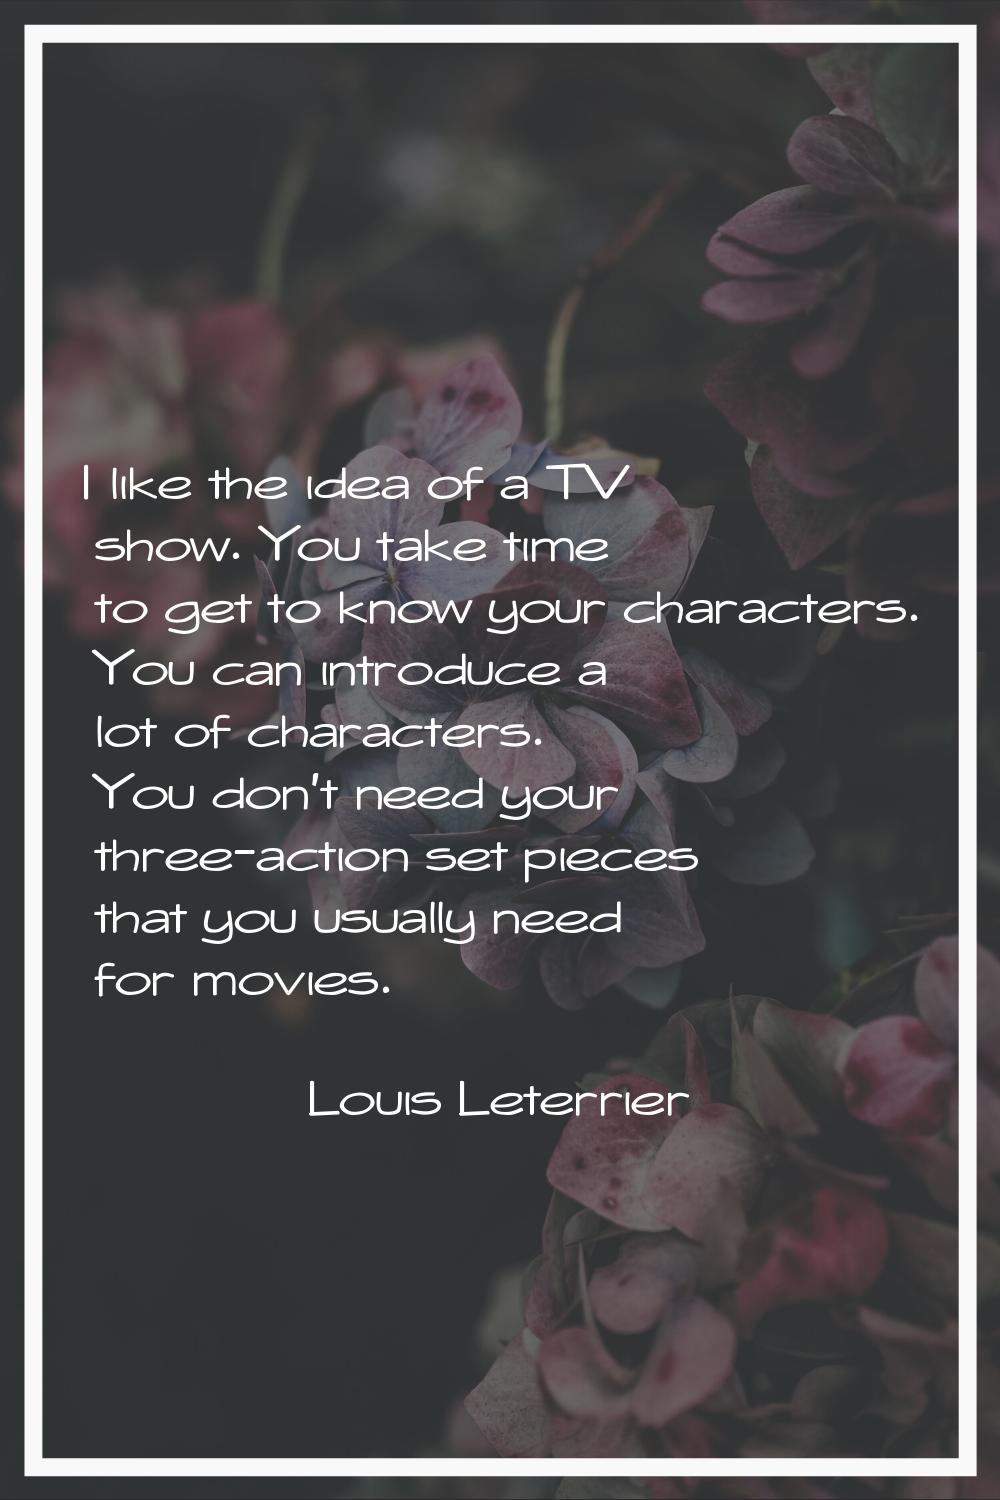 I like the idea of a TV show. You take time to get to know your characters. You can introduce a lot